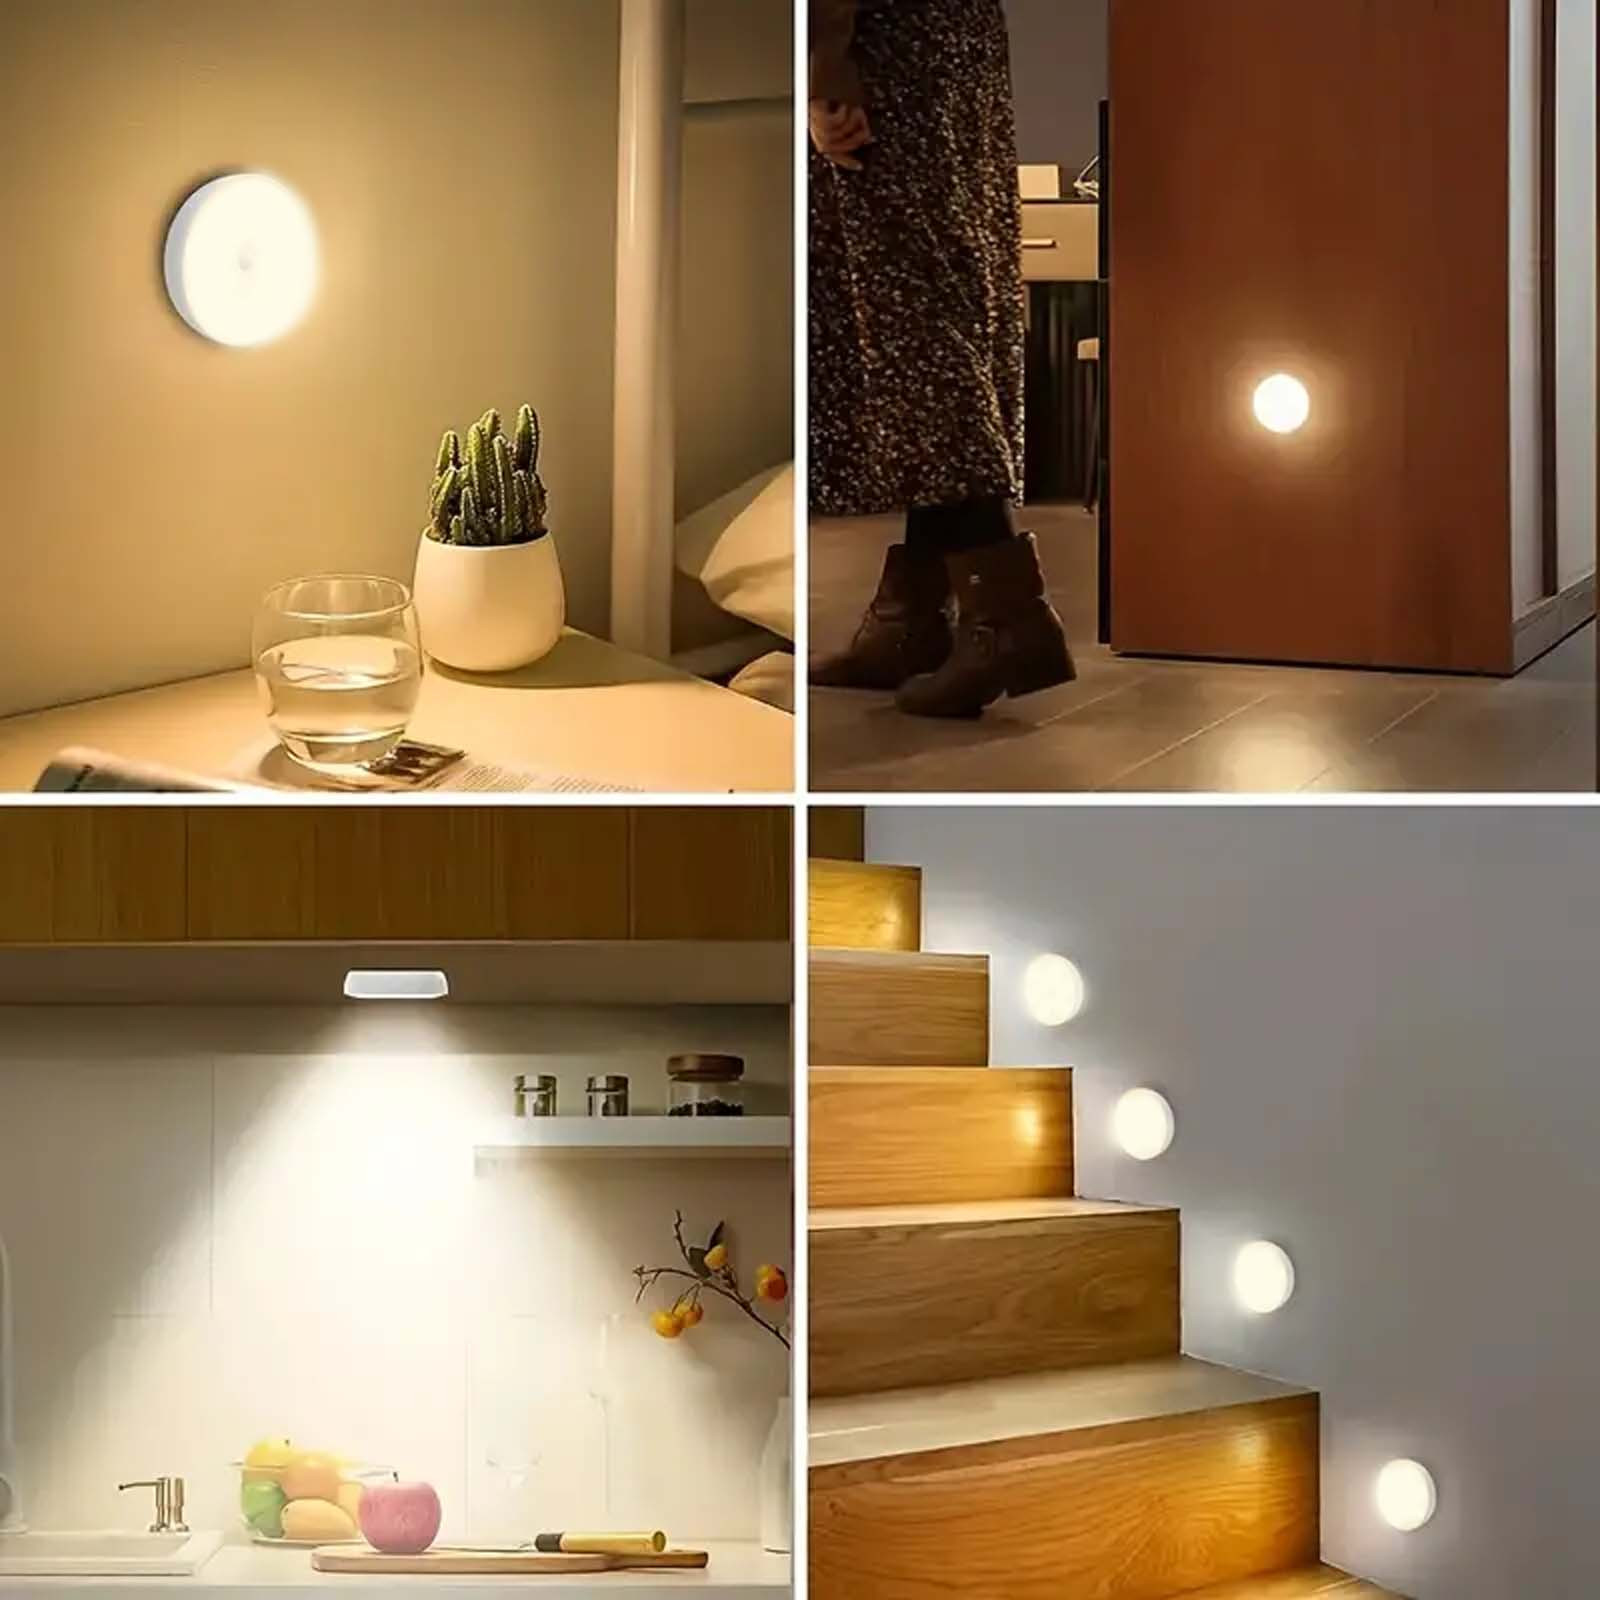 8-LED USB Rechargeable Night Light,Body Induction Lamp,3 Working Modes,Smart Wall Light With Stick-On Magnetic Strip For Homes, Bathroom, Bedroom, Kitchen, Hallways, Cars, Garages And Corridor Decor details 3